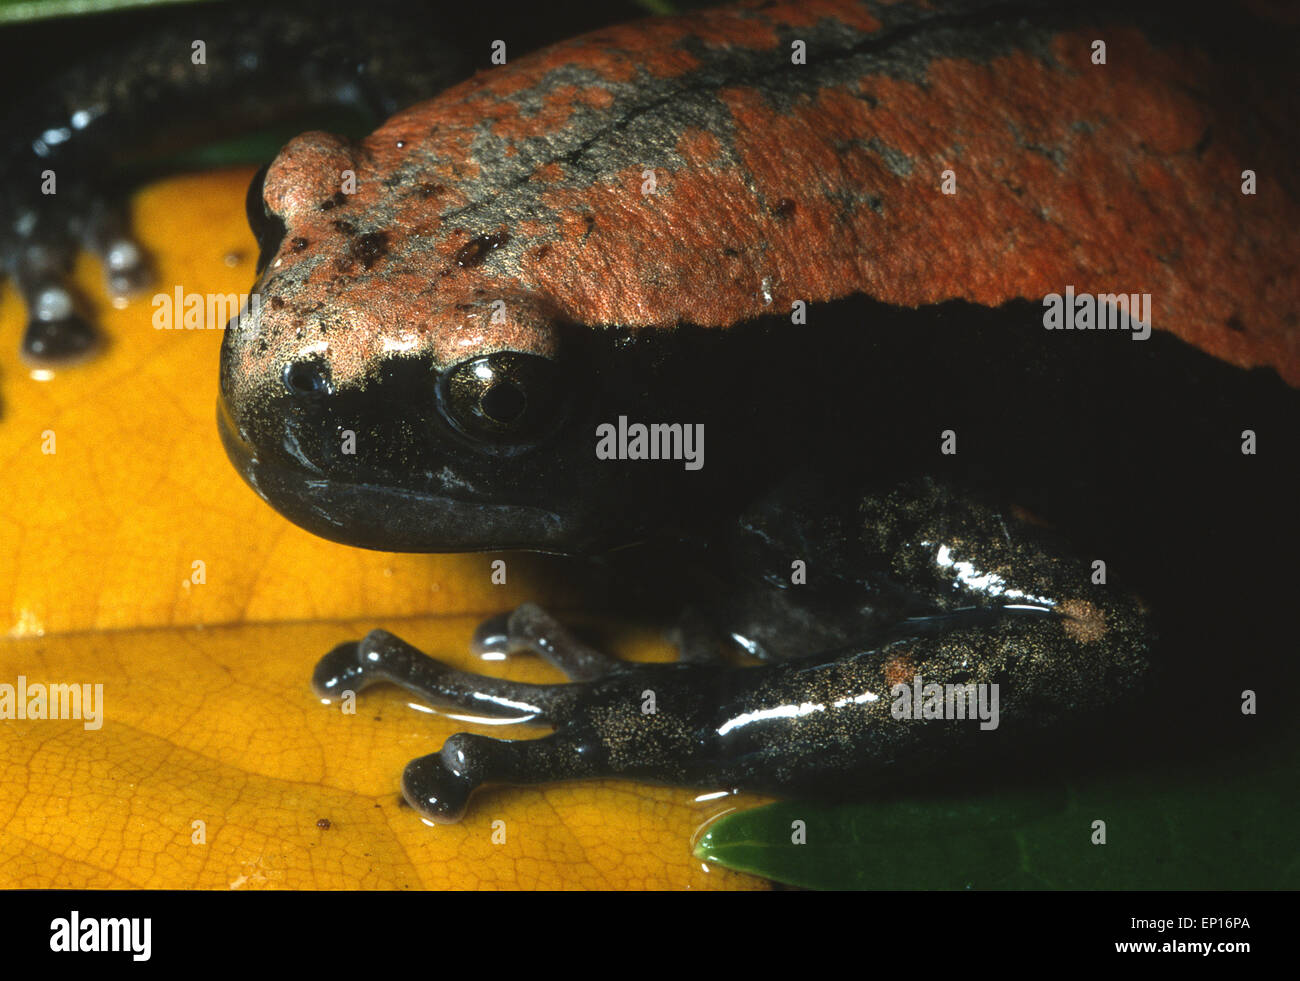 Banded rubber frog (Phrynomantis bifasciatus), Microhylidae, Africa Stock Photo